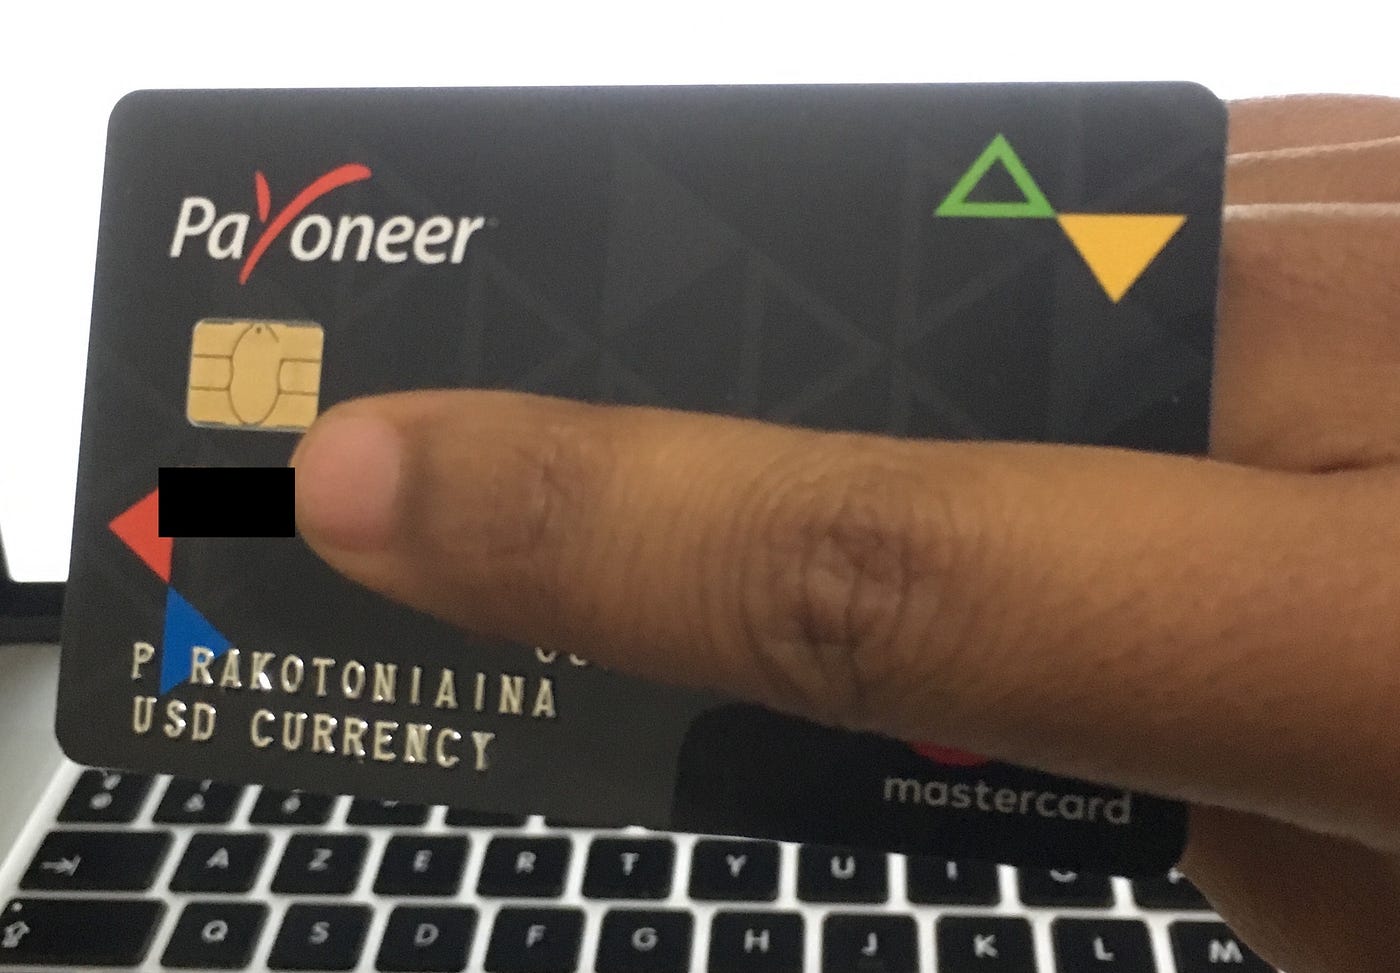 Get your Payoneer card quickly. If you don't know what Payoneer is, it… |  by Pety Ialimijoro | Medium